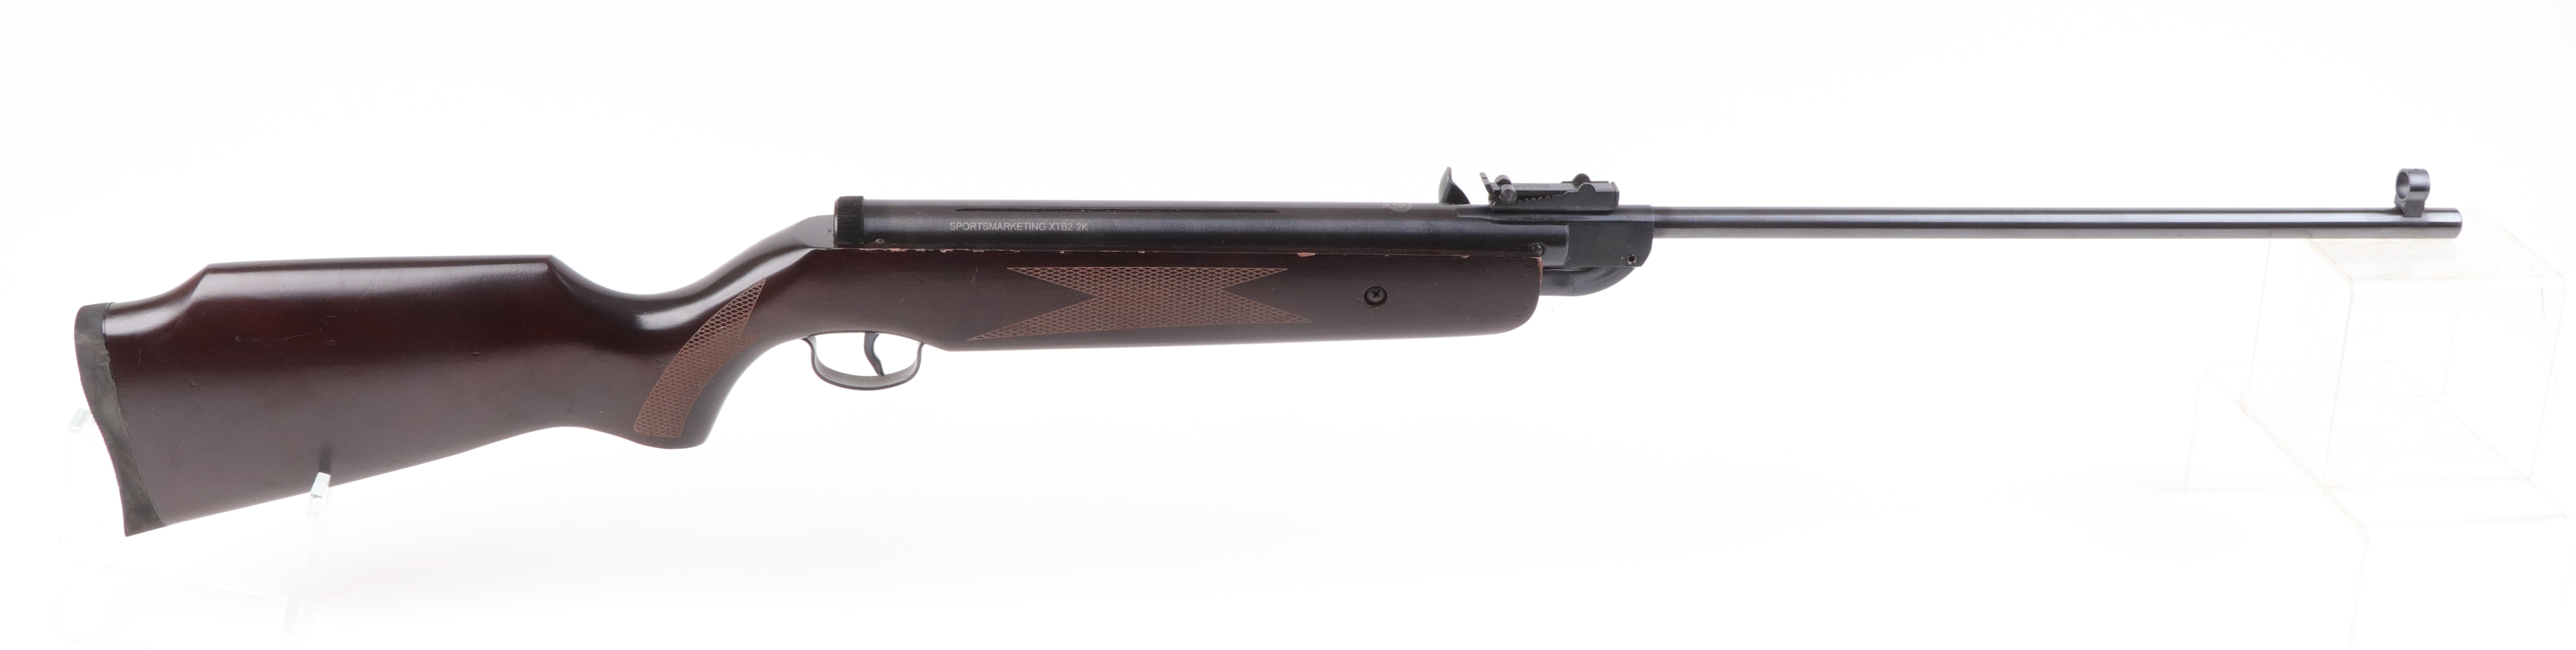 .22 SMK XTB2-2K break barrel air rifle, hooded blade and notch sights, nvn [Purchasers note: